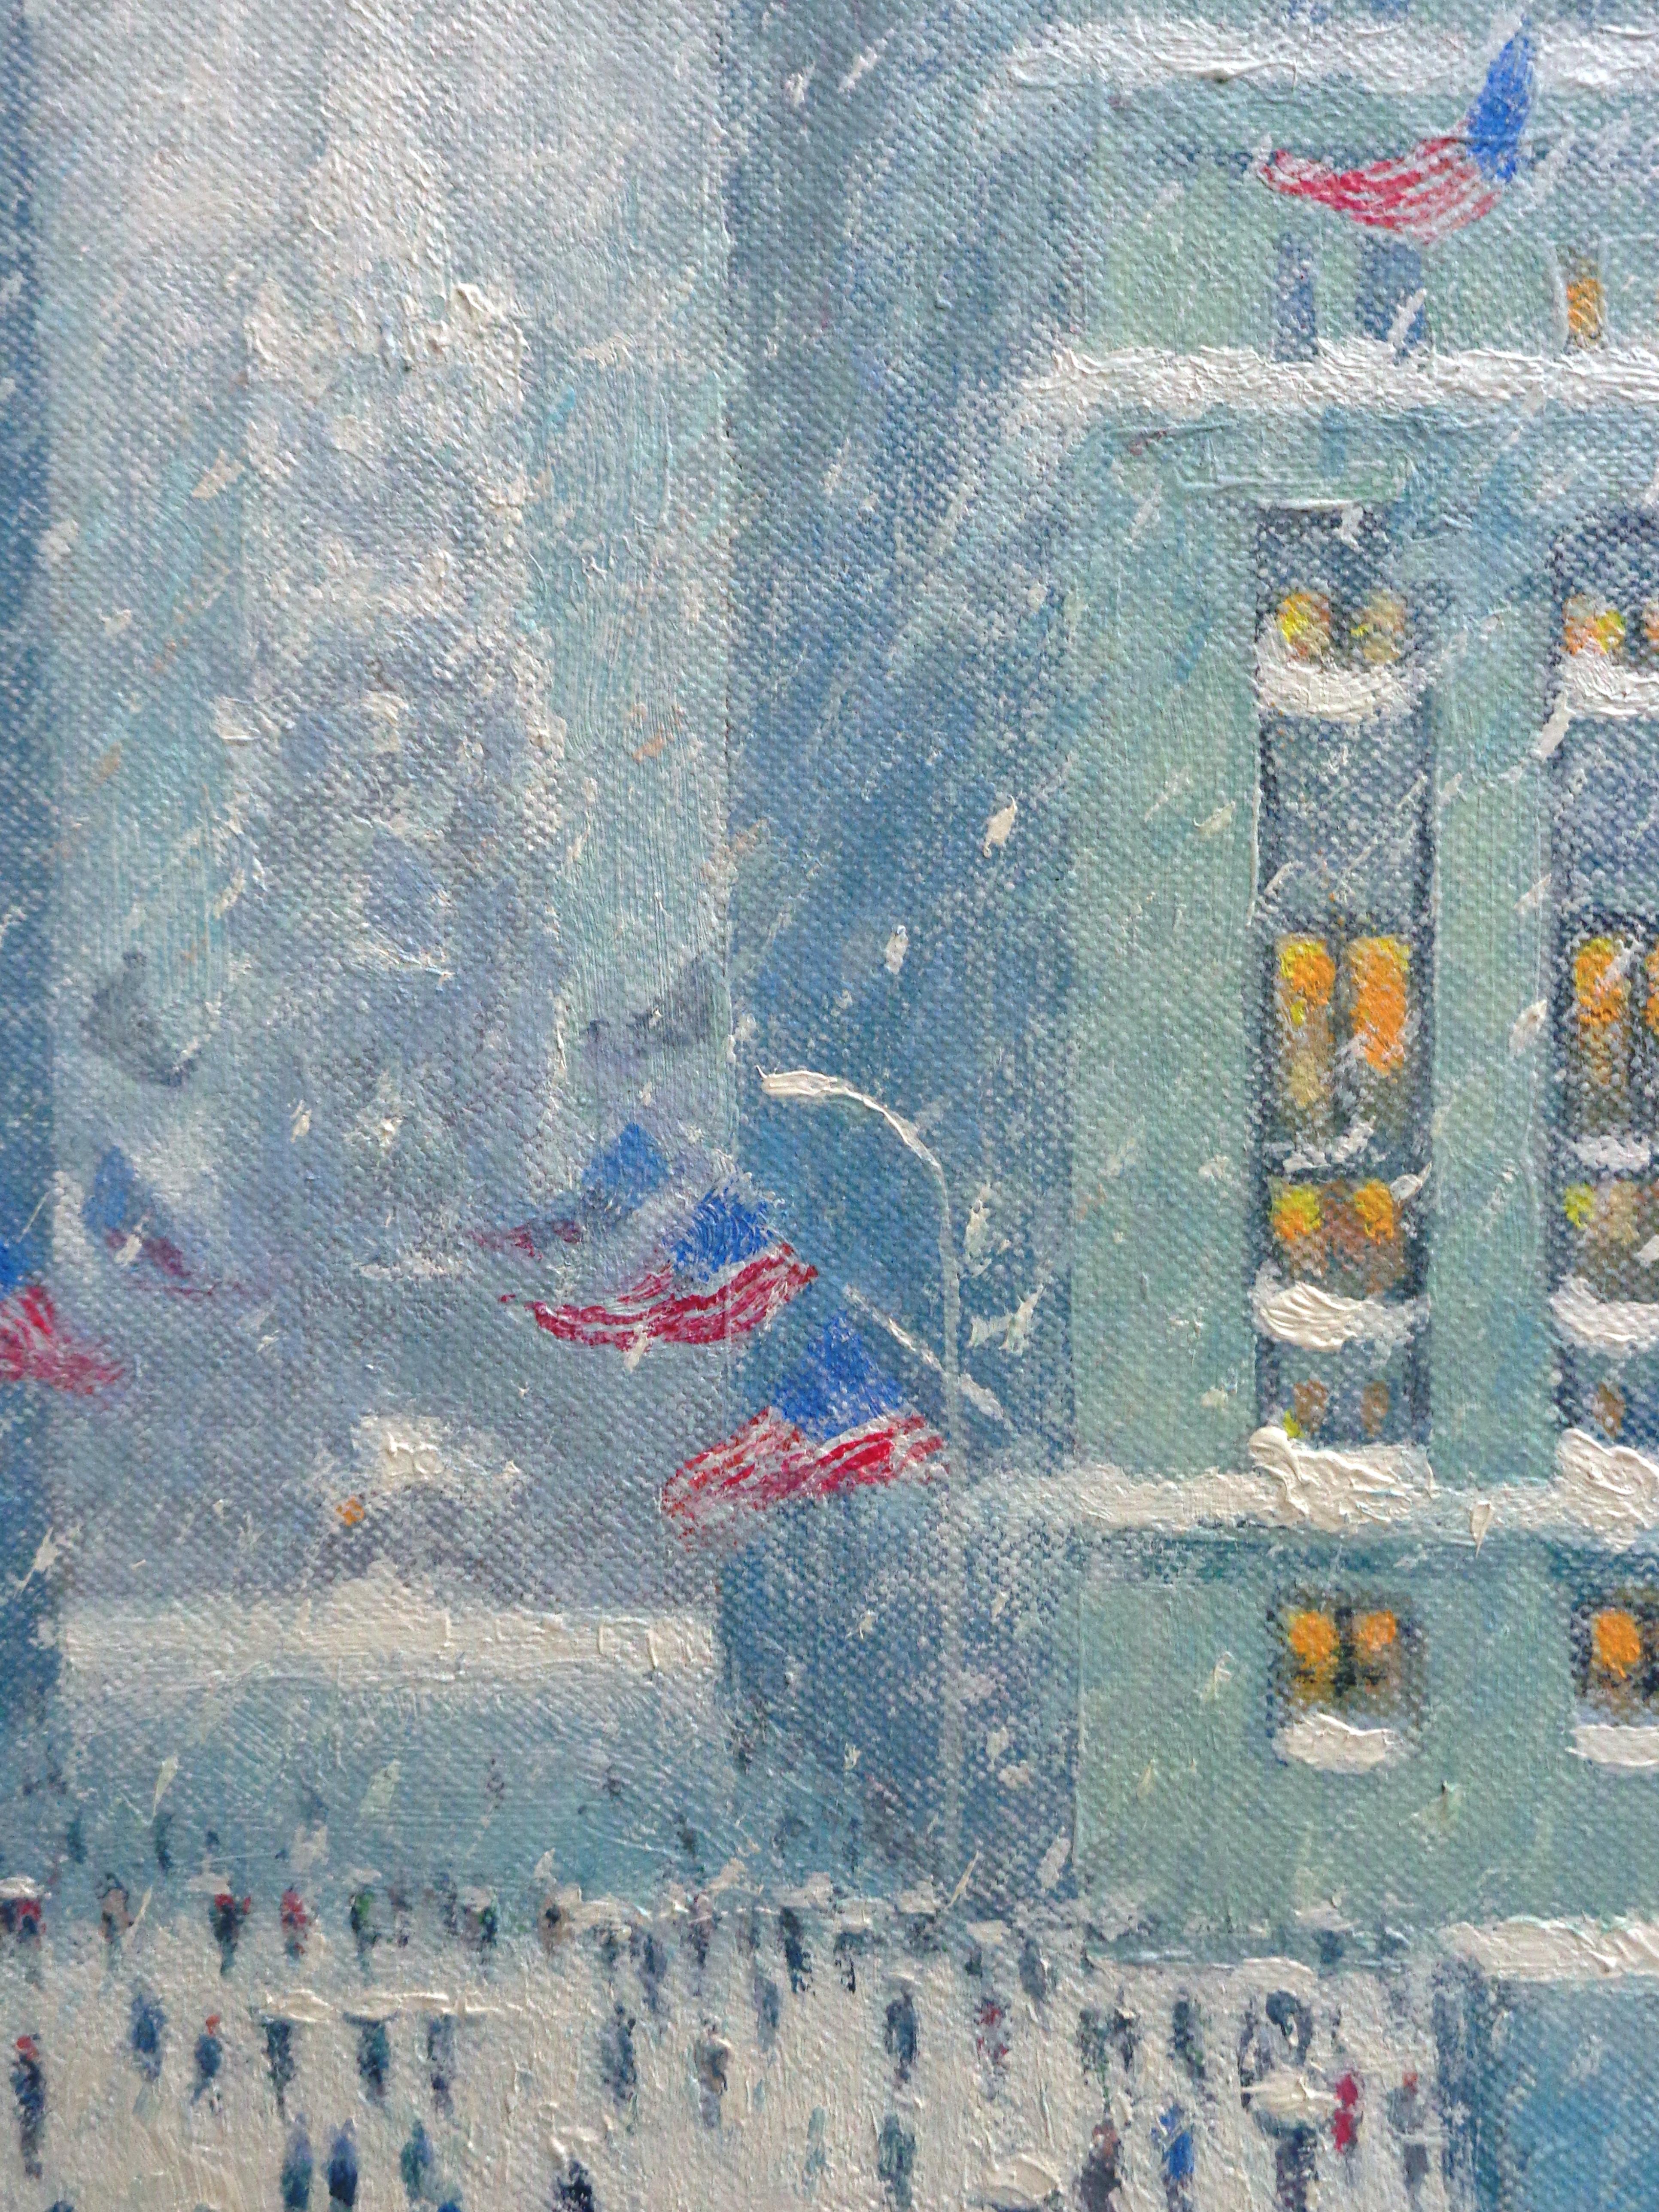  New York City Winter Wall Street Flags Oil Painting by Michael Budden 4